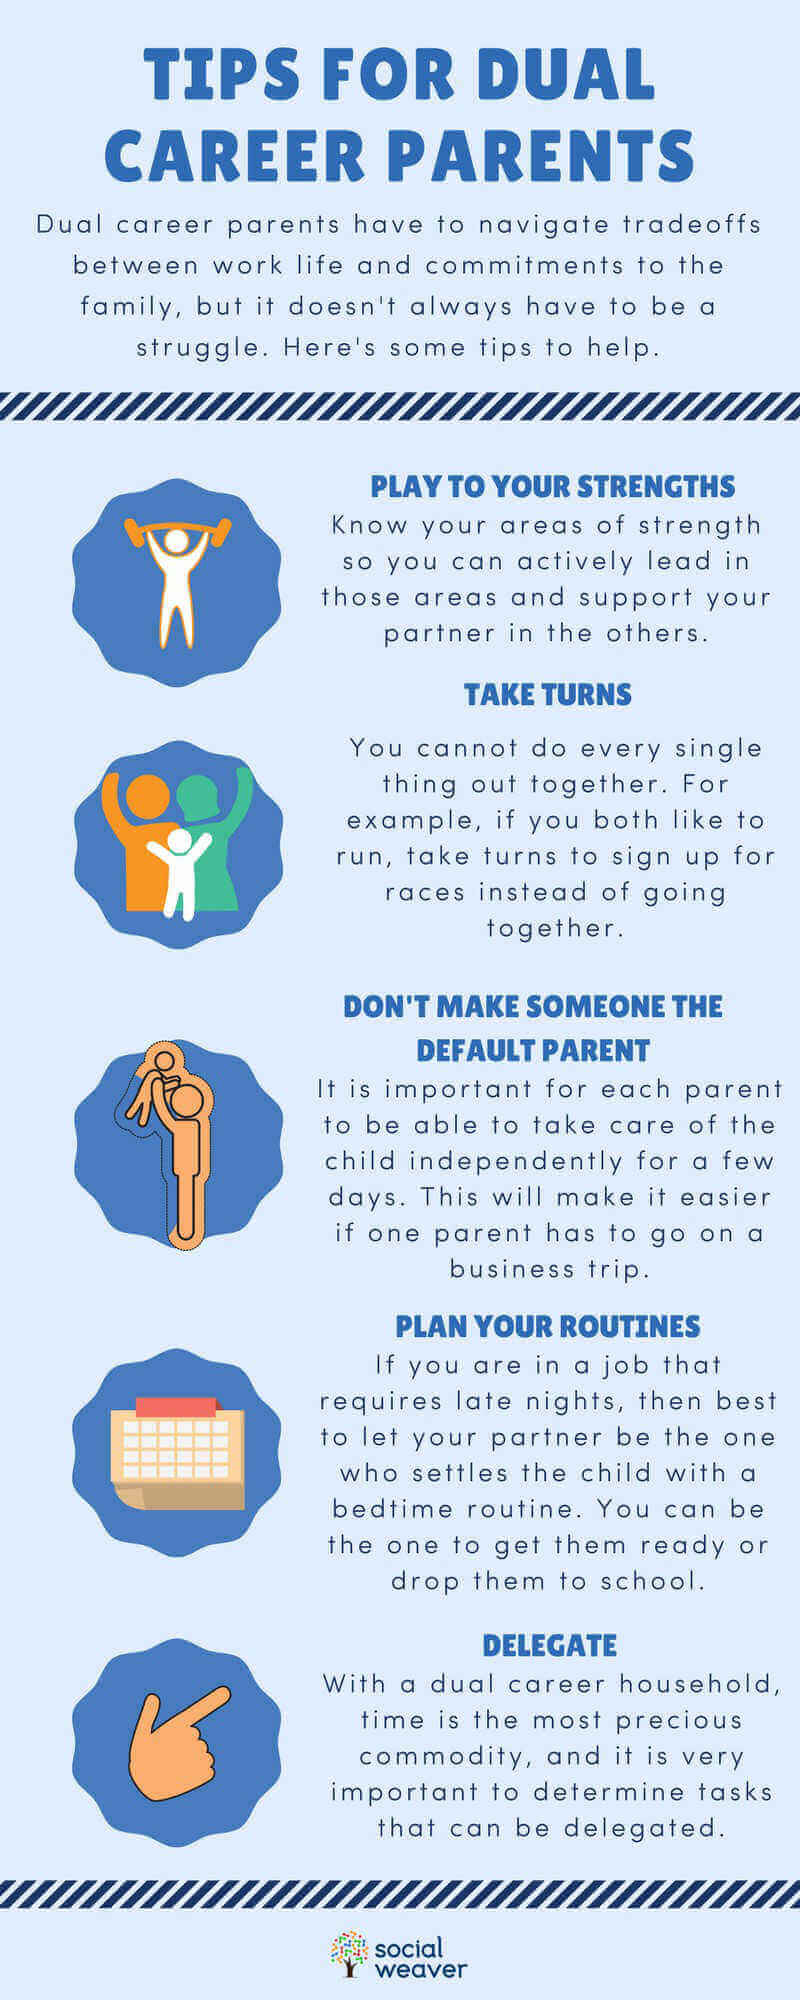 Tips for Dual Career Parents